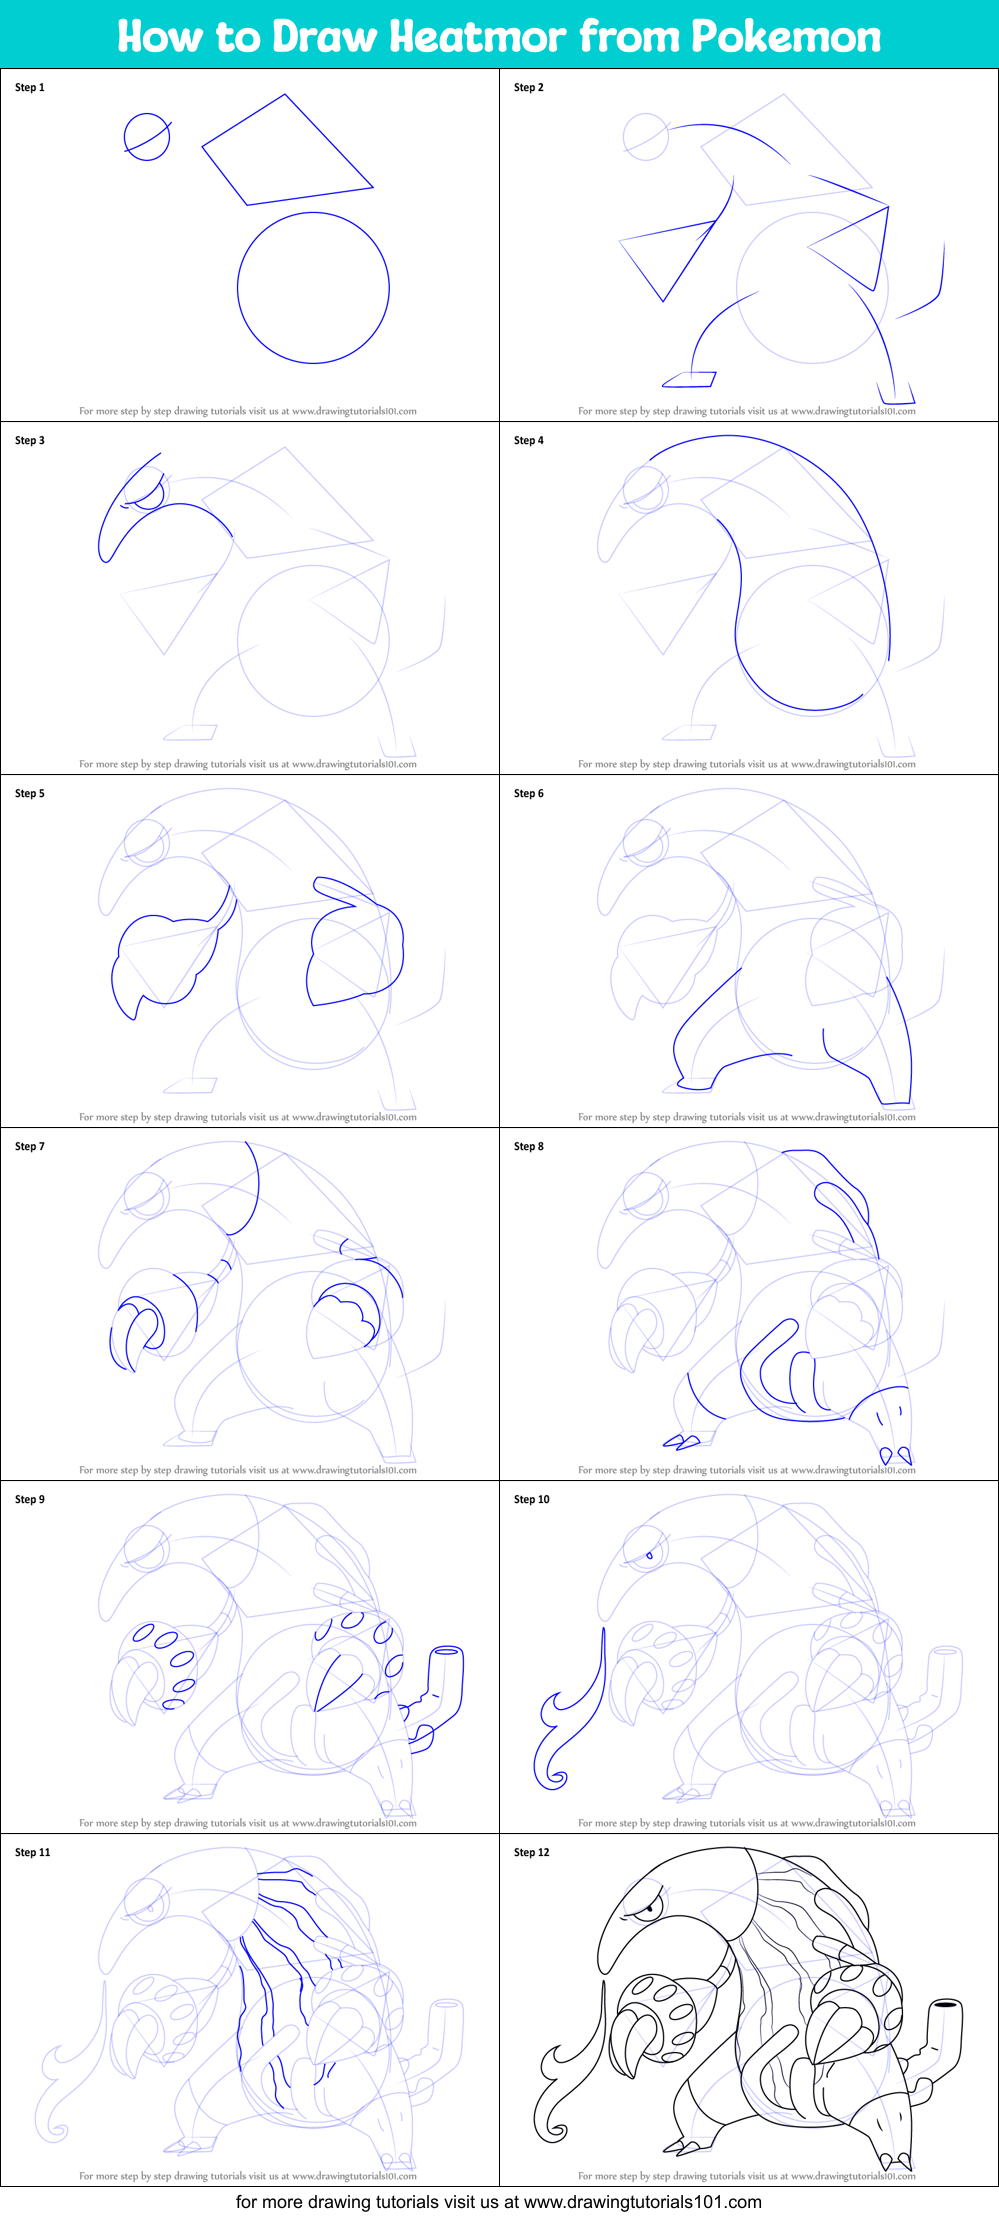 How to Draw Heatmor from Pokemon printable step by step drawing sheet